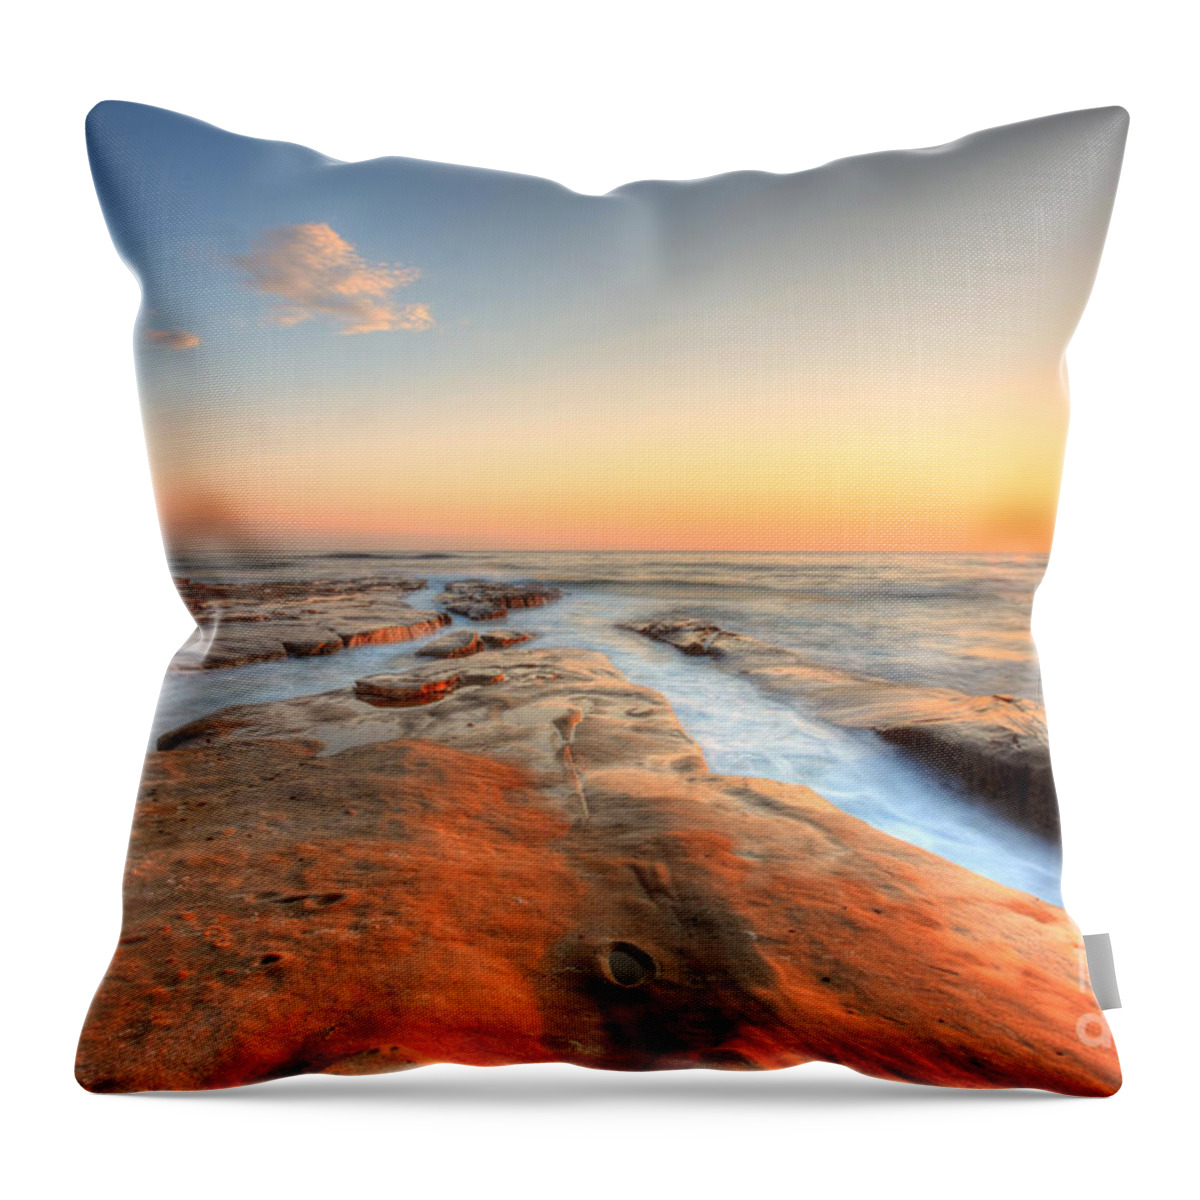 Photograph Throw Pillow featuring the photograph Sunset on La Jolla Beach by Kelly Wade